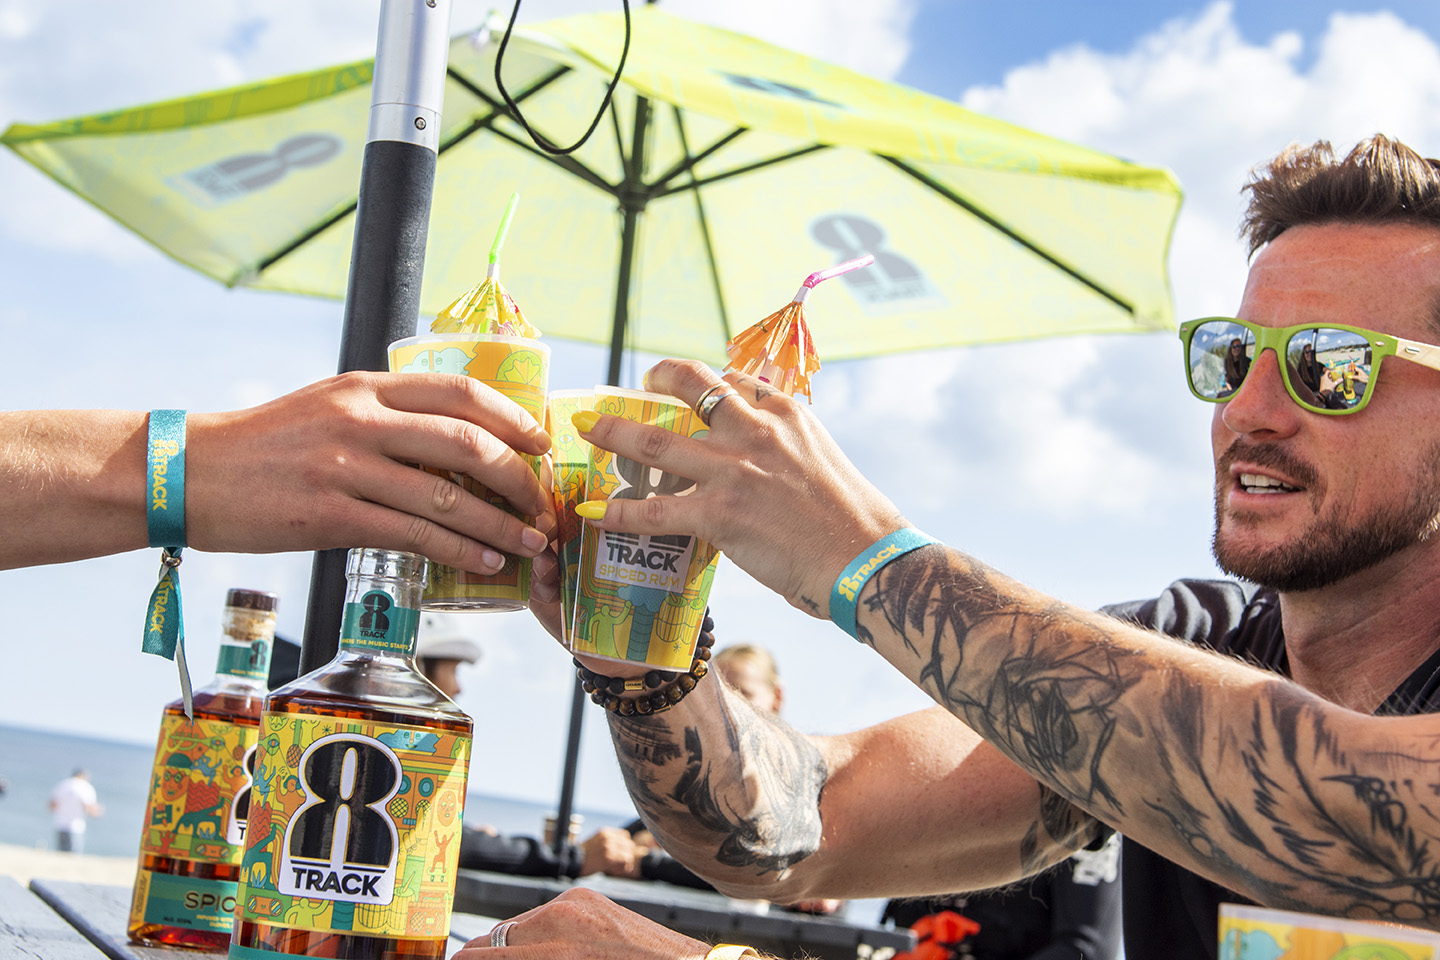 Three models holding up cups of 8Track Rum in a cheers pose, in an outdoor bar setting on a beach with umbrellas in the background